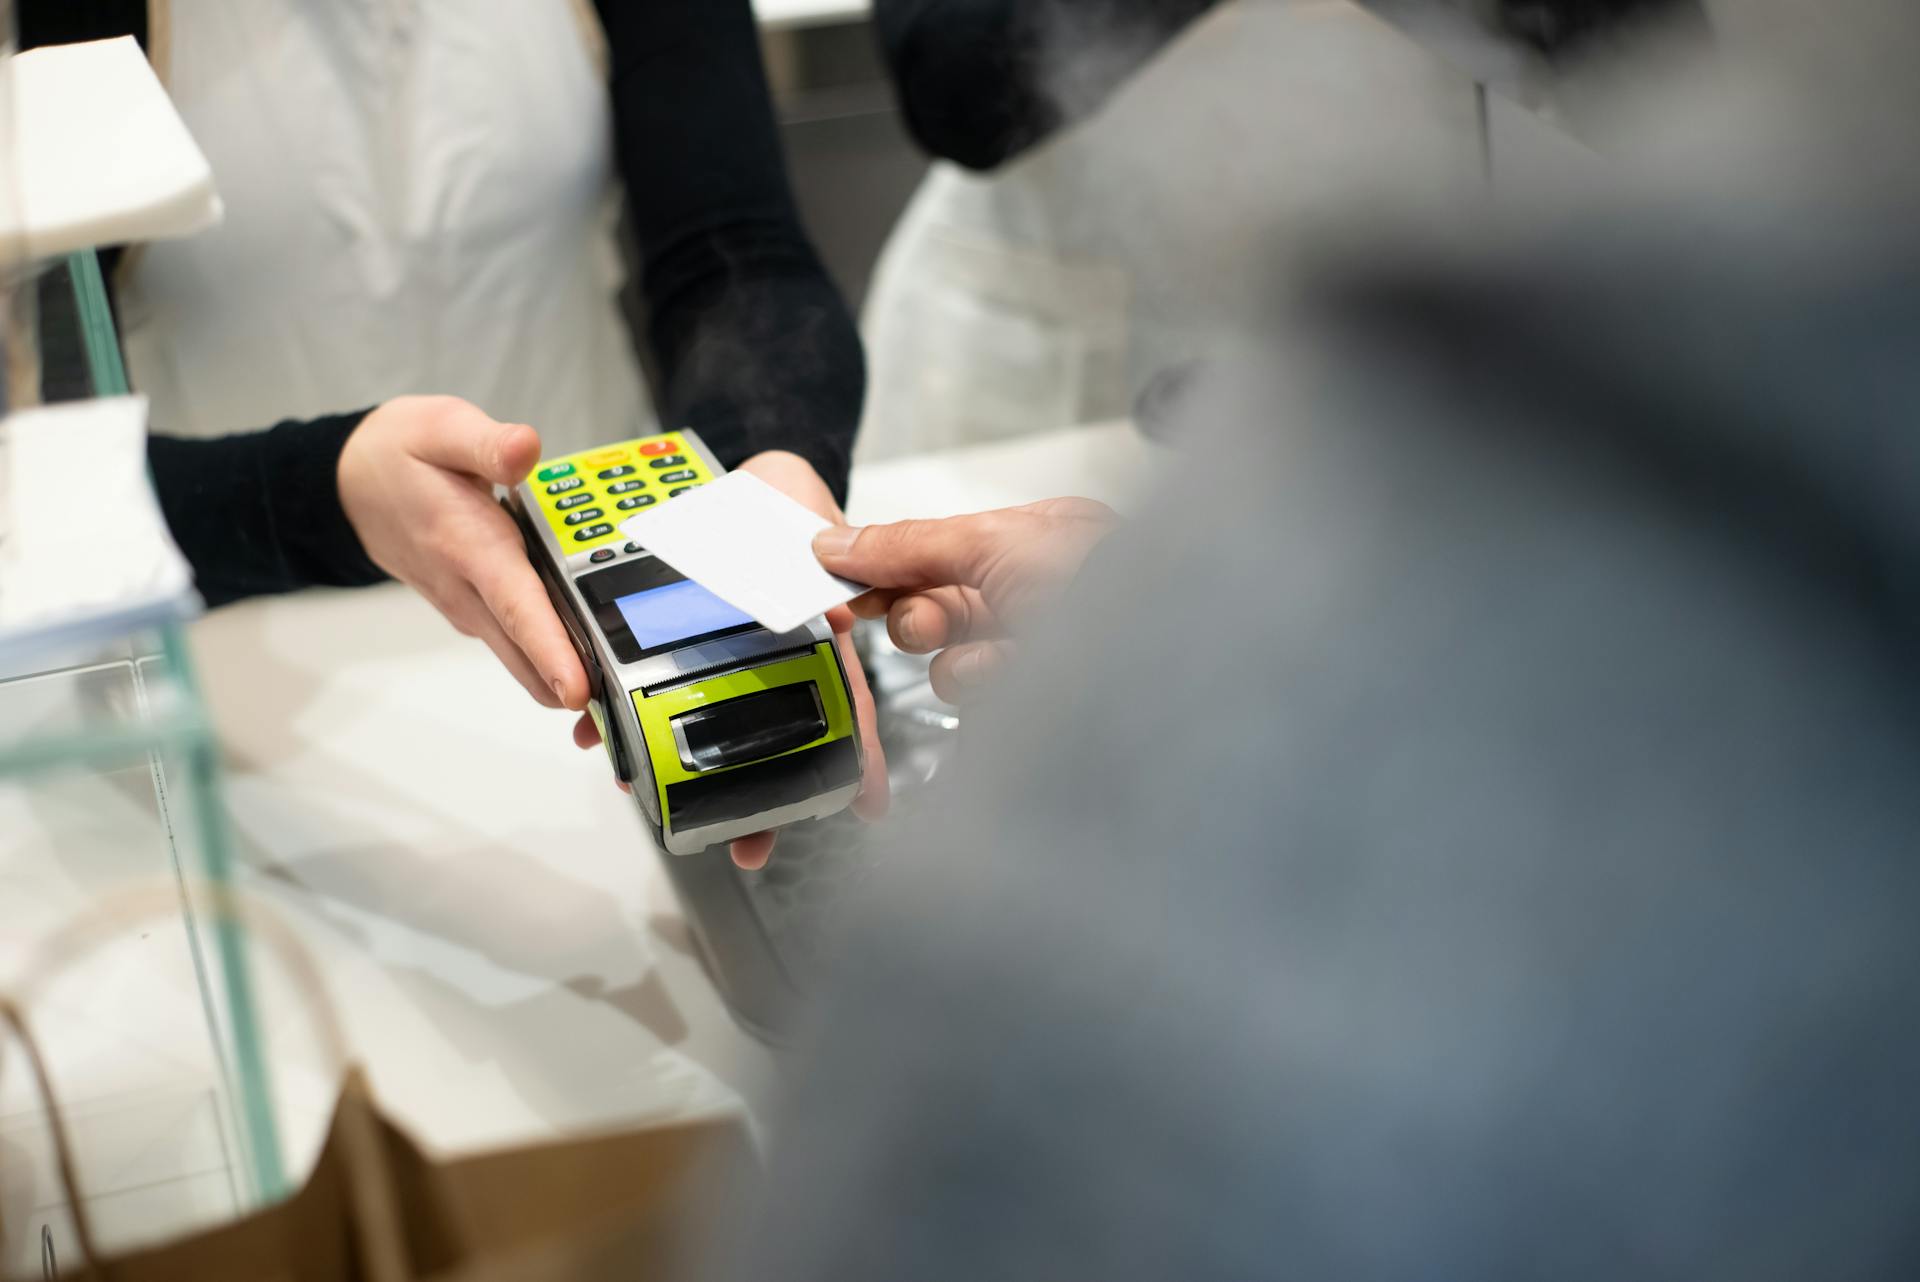 A person paying with their card | Source: Pexels